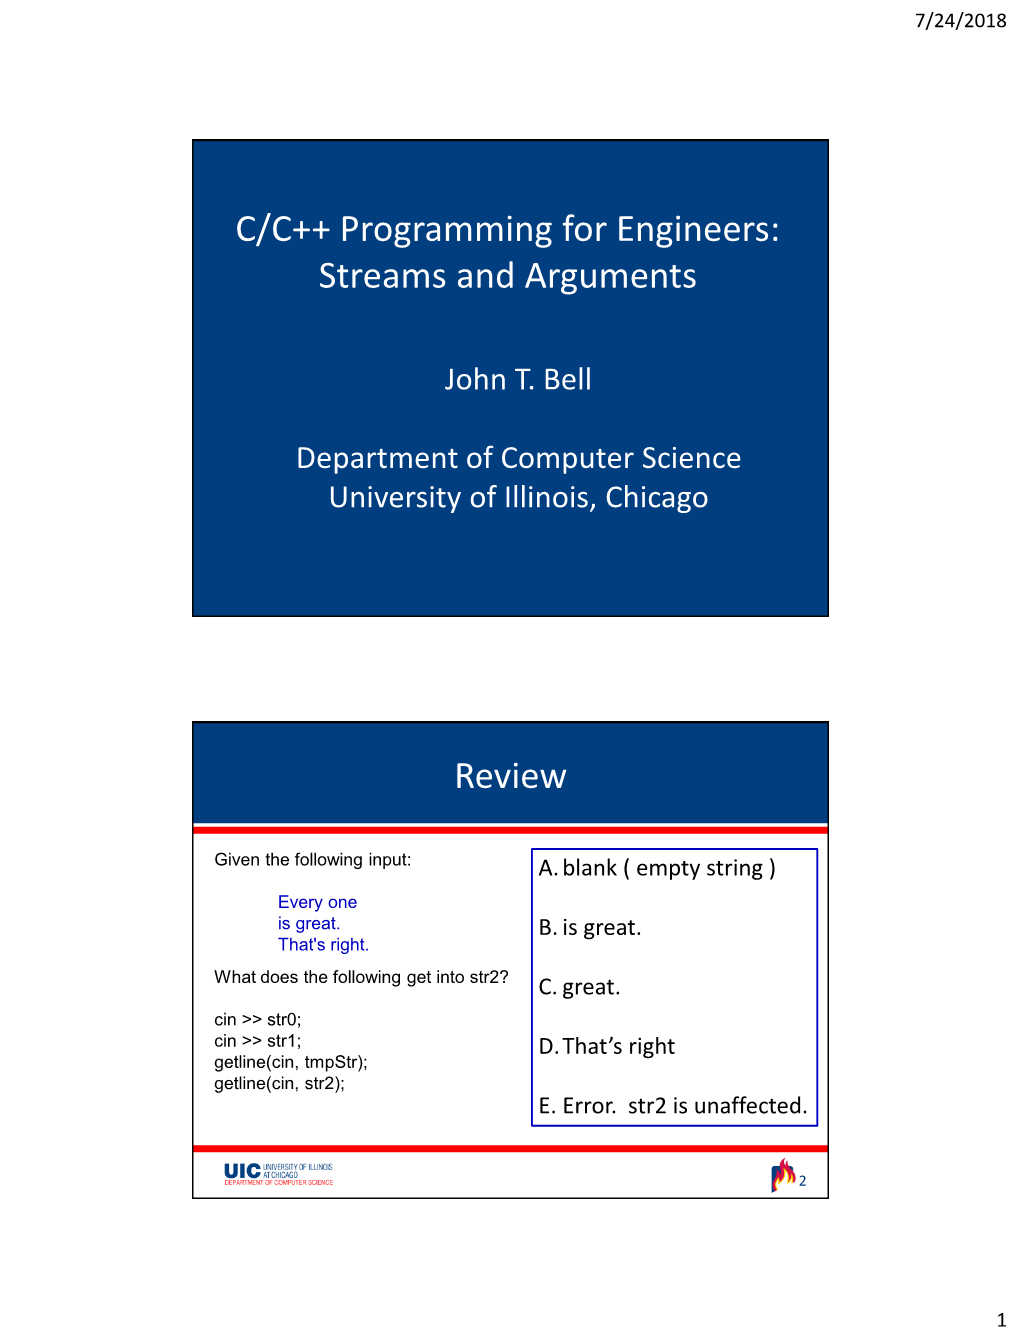 C/C++ Programming for Engineers: Streams and Arguments Review